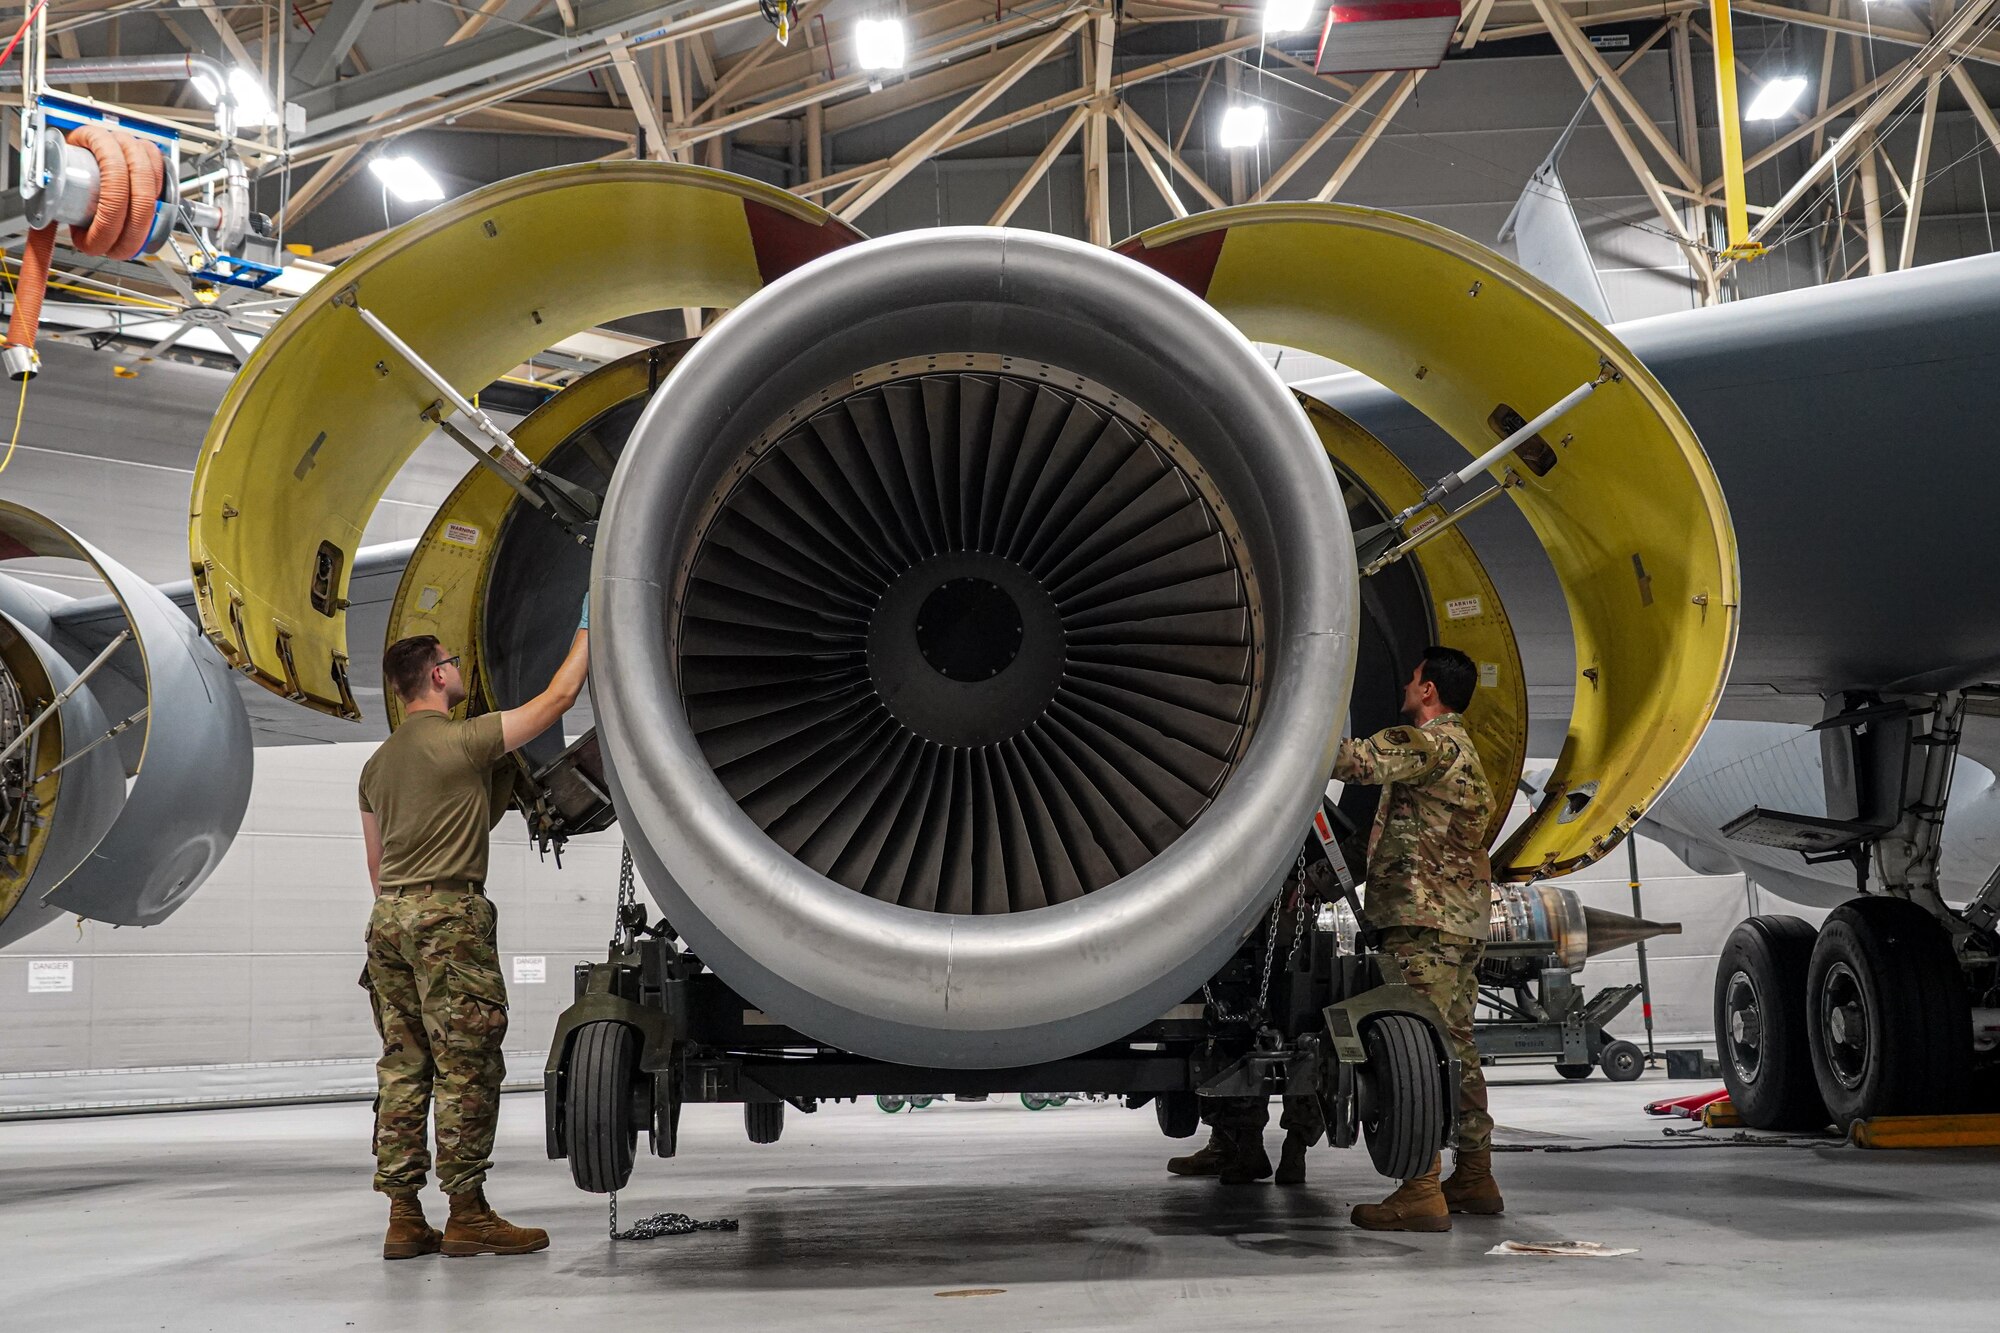 Staff Sgt. Casey Boots (left) and Tech. Sgt. Thomas Carozzolo (right), aerospace propulsion specialist assigned to the 914th Aircraft Maintenance Squadron at Niagara Falls Air Reserve Station, New York, monitored weight gauges while installing a KC-135 Stratotanker engine on Oct. 18, 2022. They must carefully monitor weight distribution to ensure the engine is even before setting it in place. (U.S. Air Force photo by 1st Lt. Lucas Morrow)